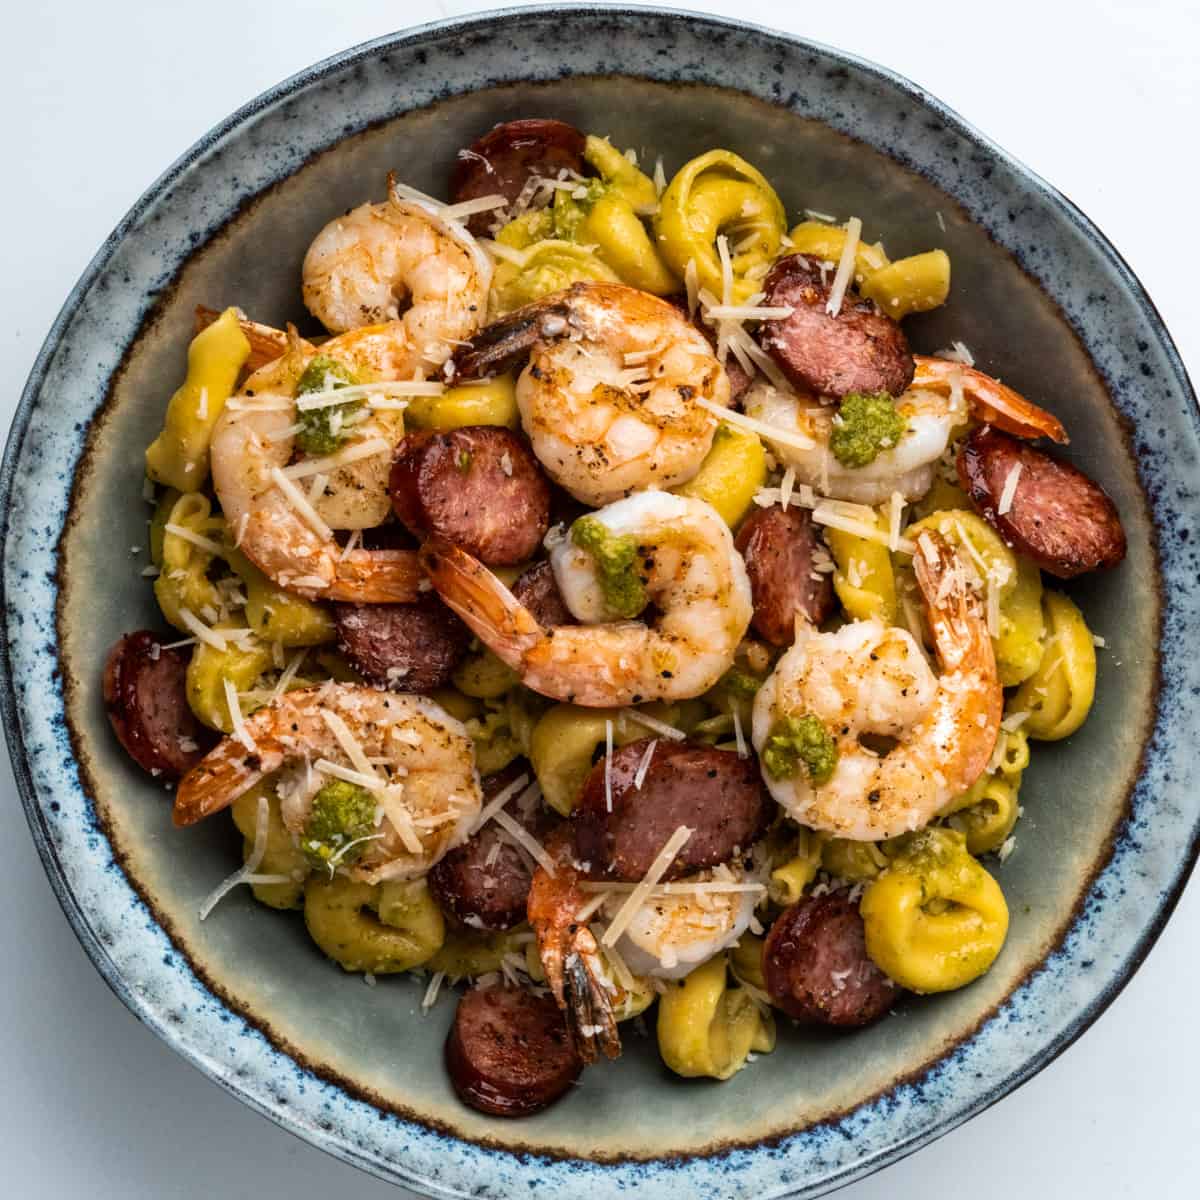 Shrimp & Andouille with tortellini served family style